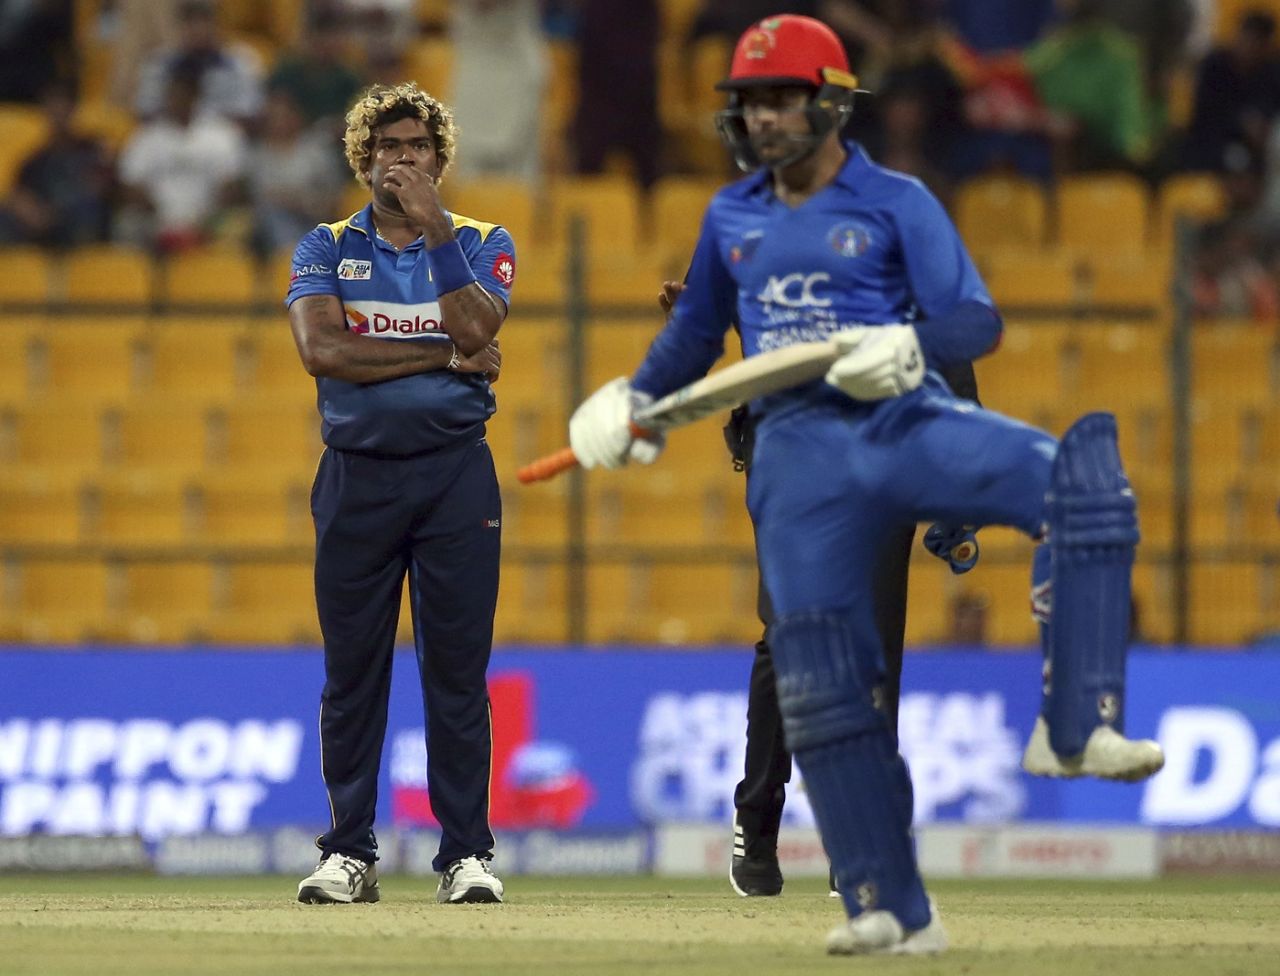 Lasith Malinga was unlucky with catches being dropped off his bowling, Afghanistan v Sri Lanka, 3rd ODI, Group B, Asia Cup, September 17, 2018